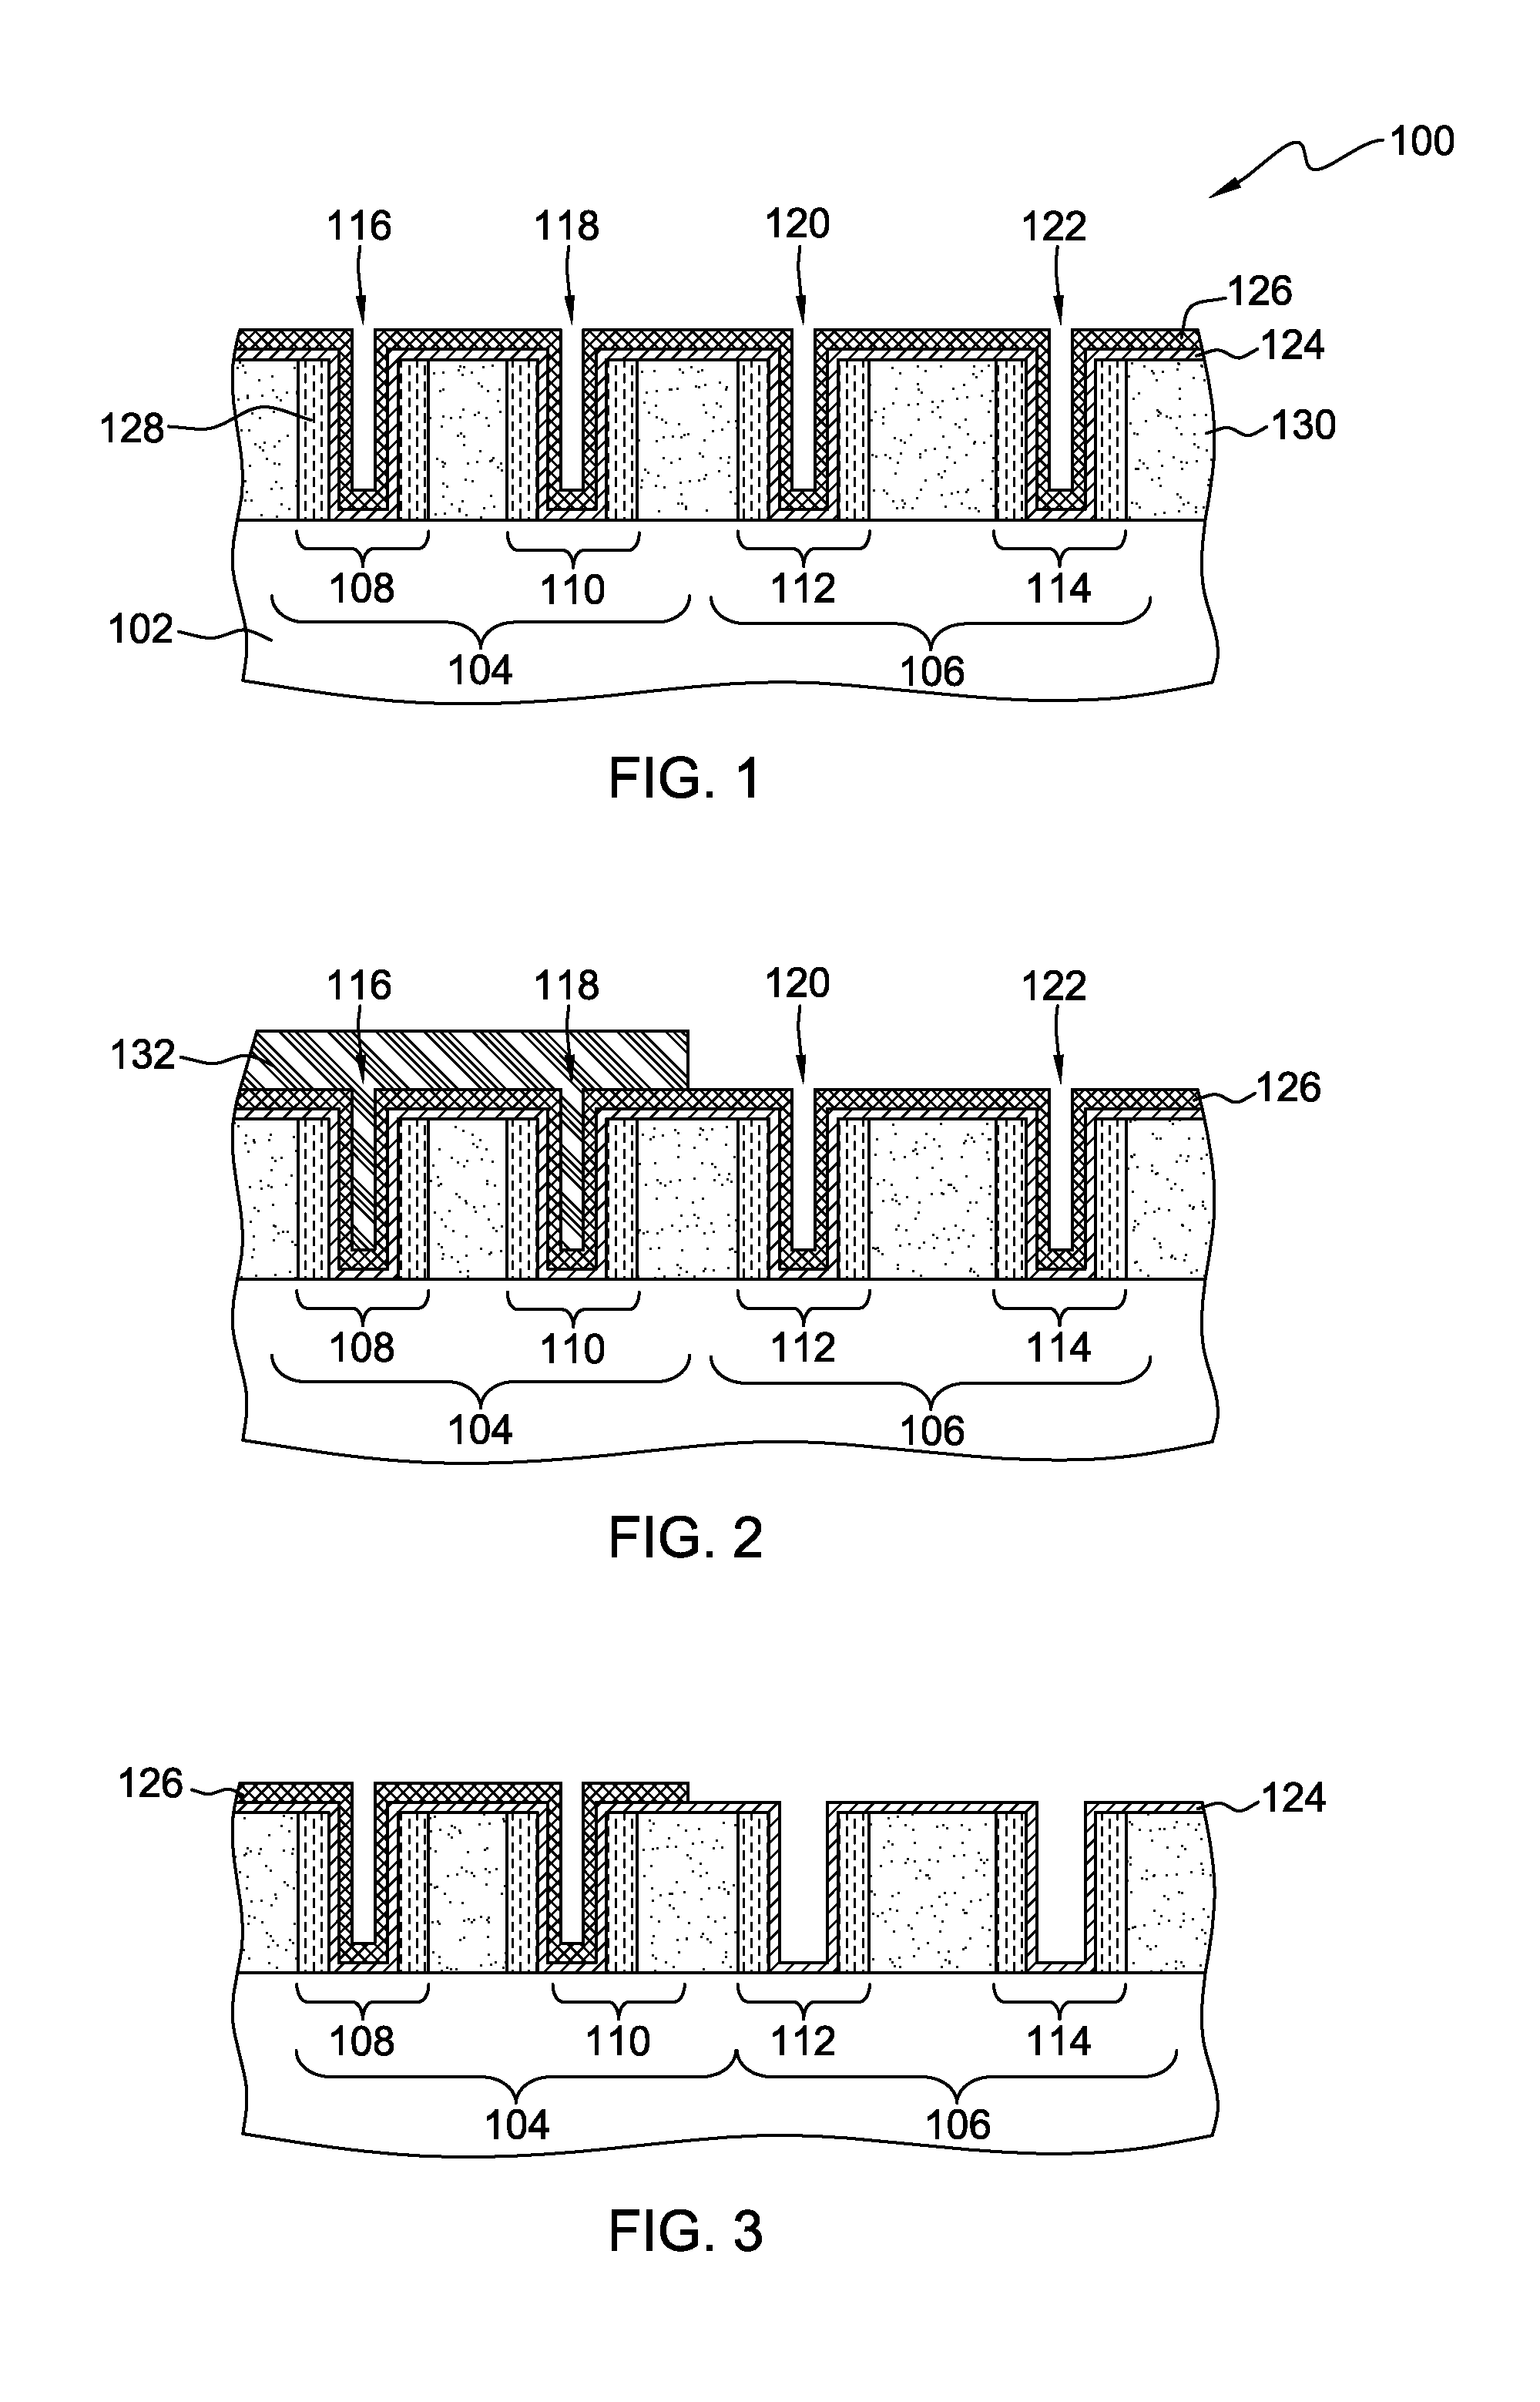 Common fabrication of different semiconductor devices with different threshold voltages